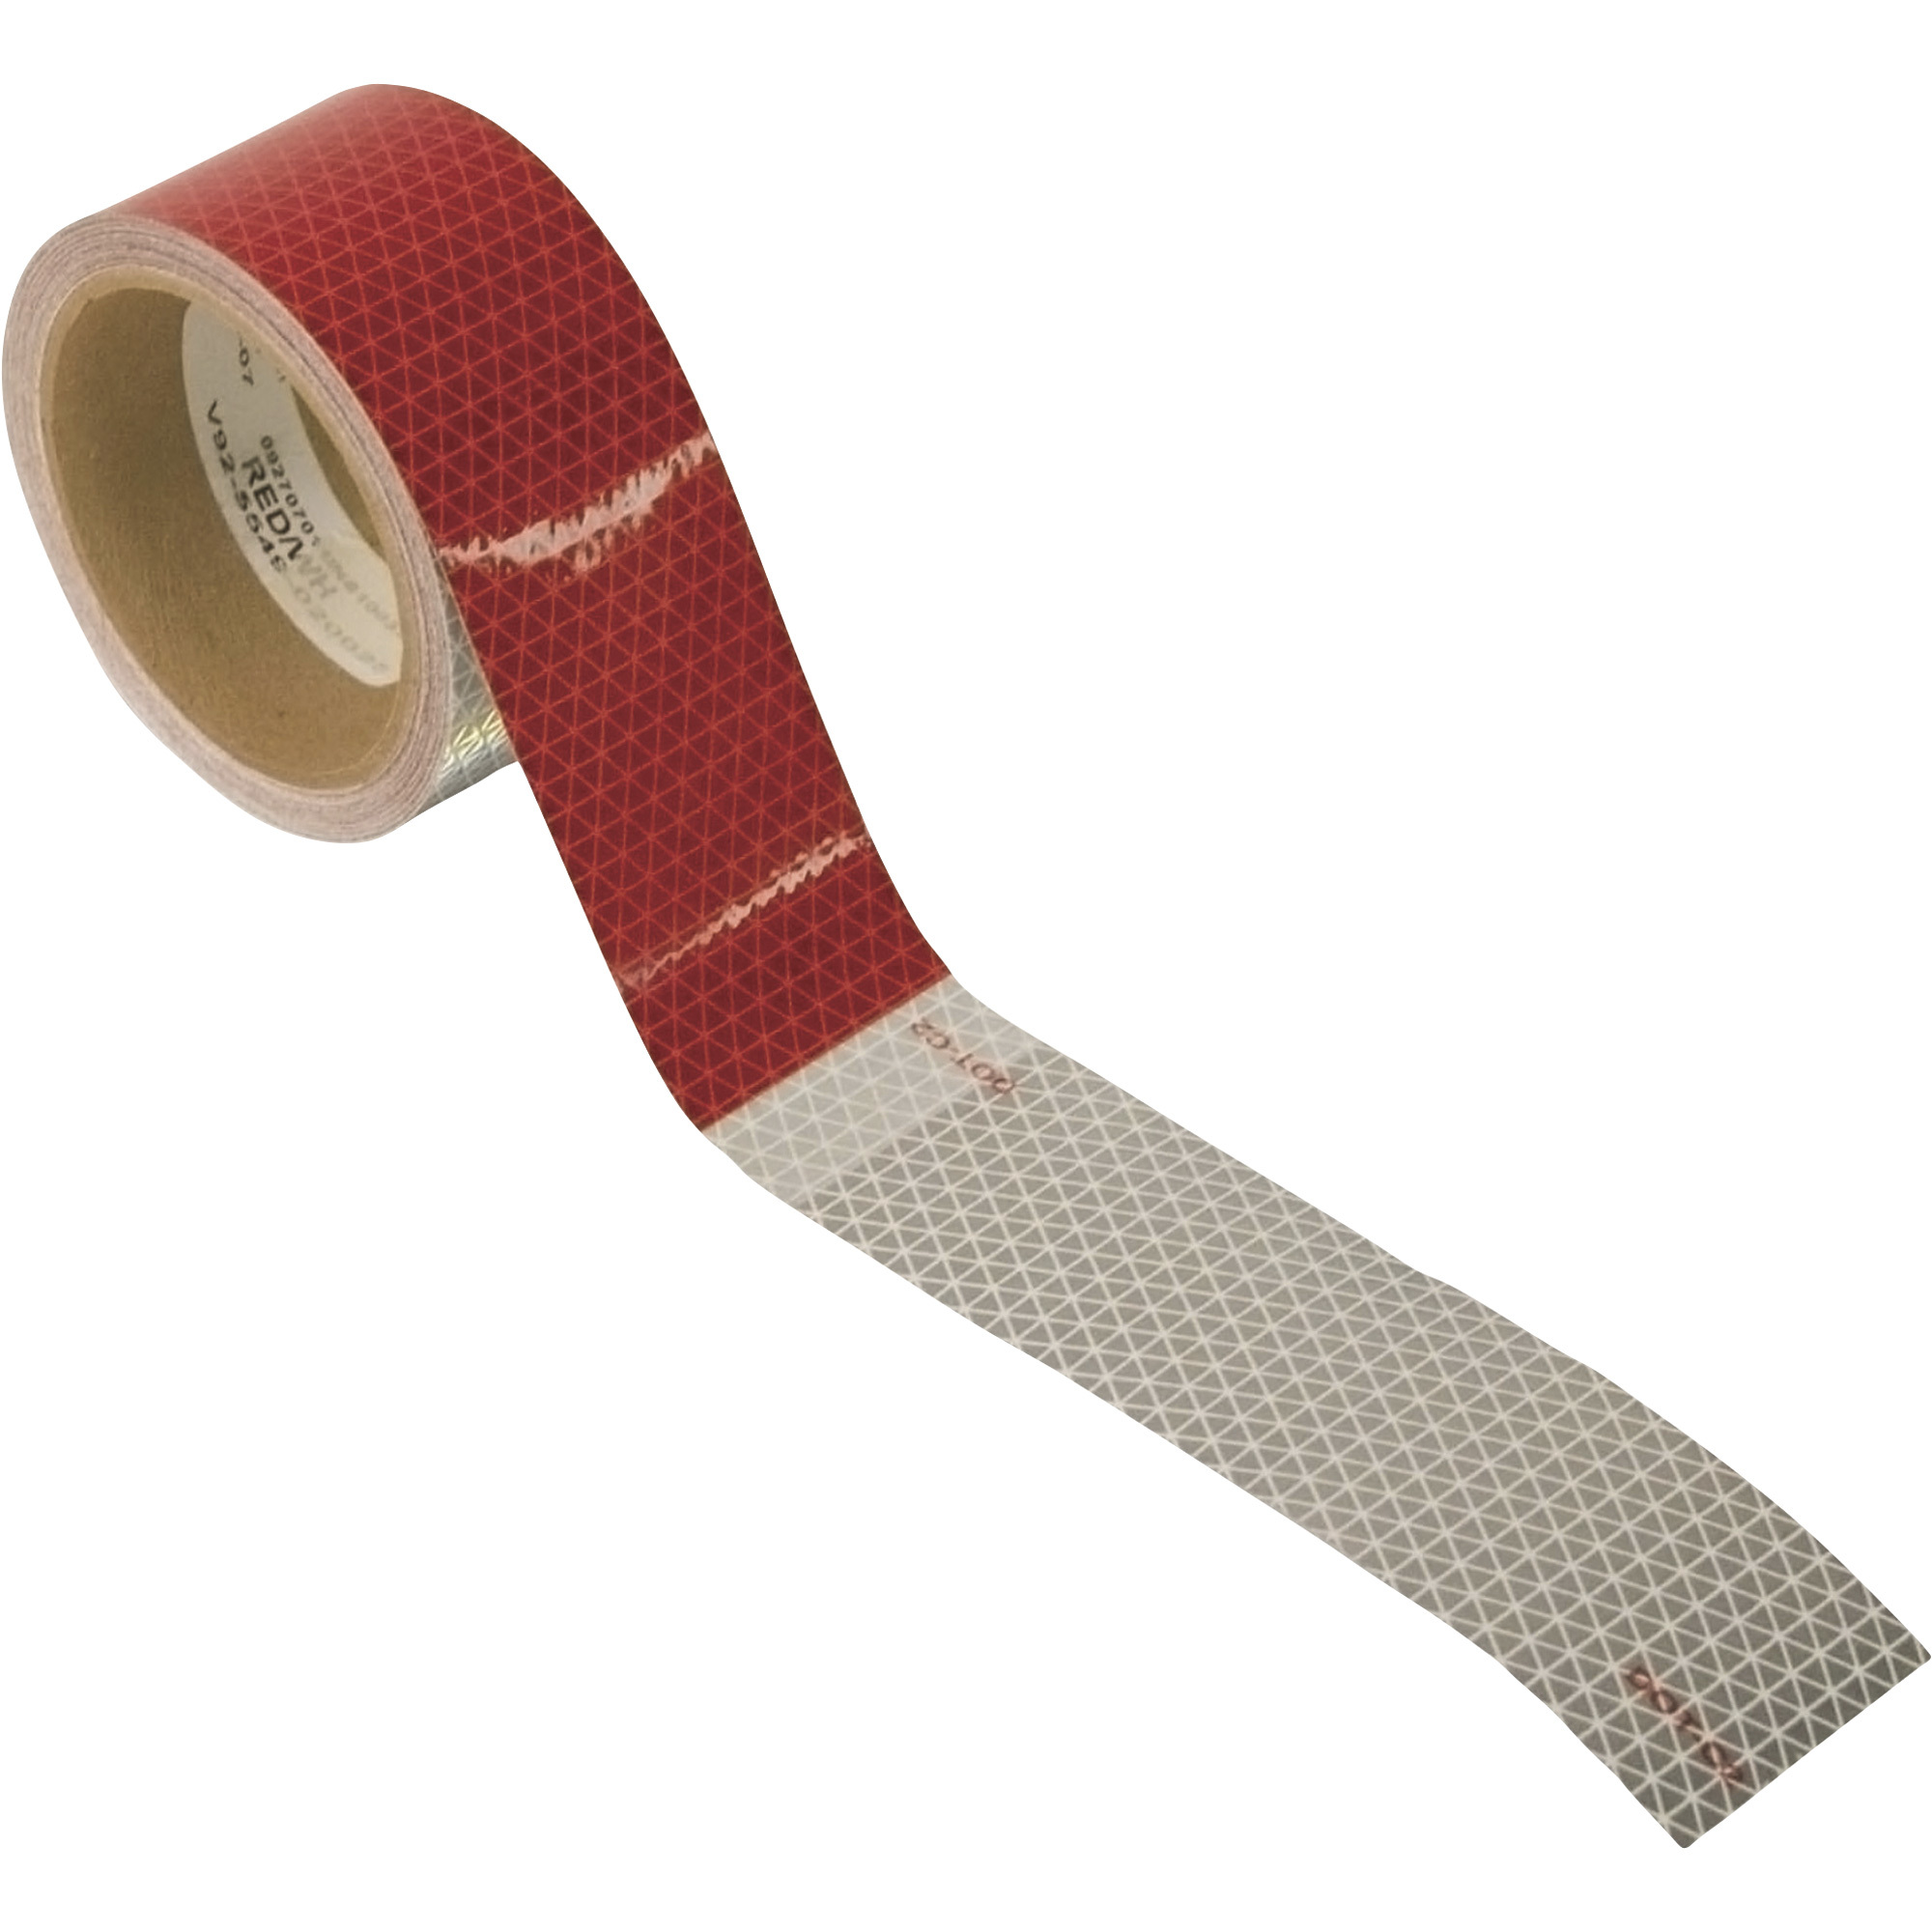 Hopkins Towing Solutions Reflective Conspicuity Tape â 2Inch x 30ft., Model C285RW